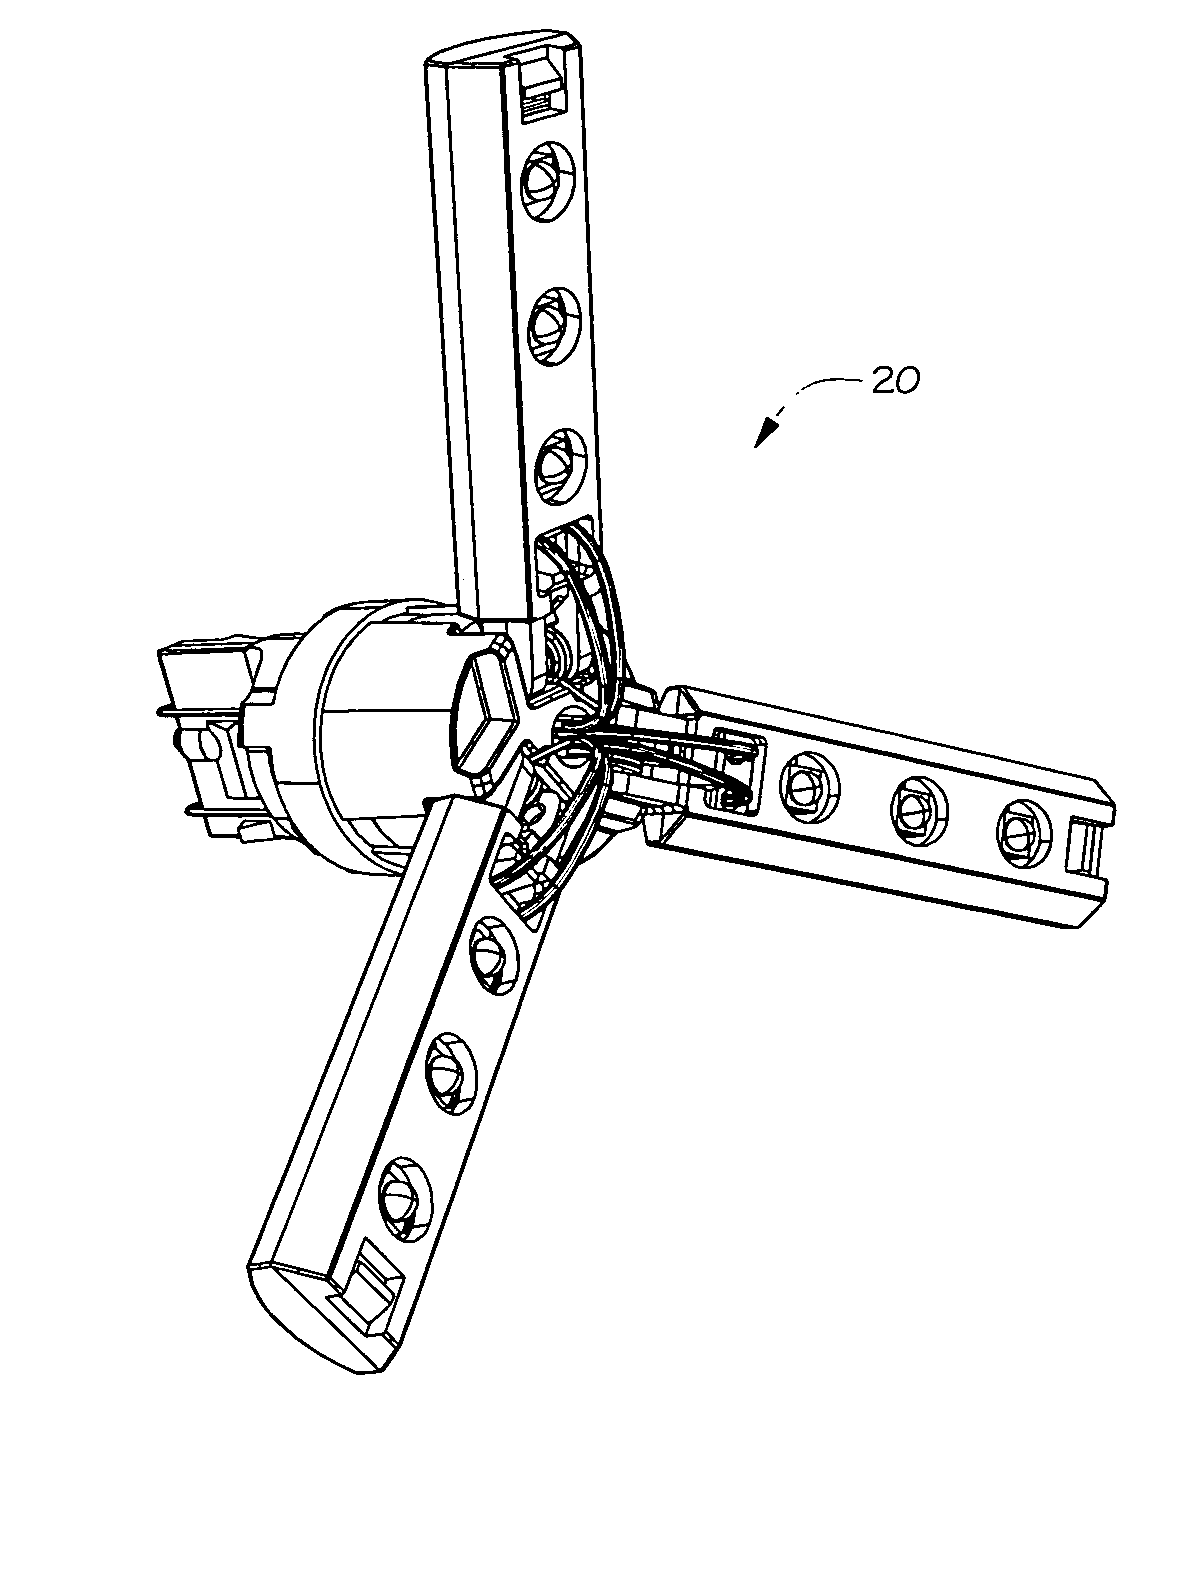 Illumination device with arms that open after passing through a hole